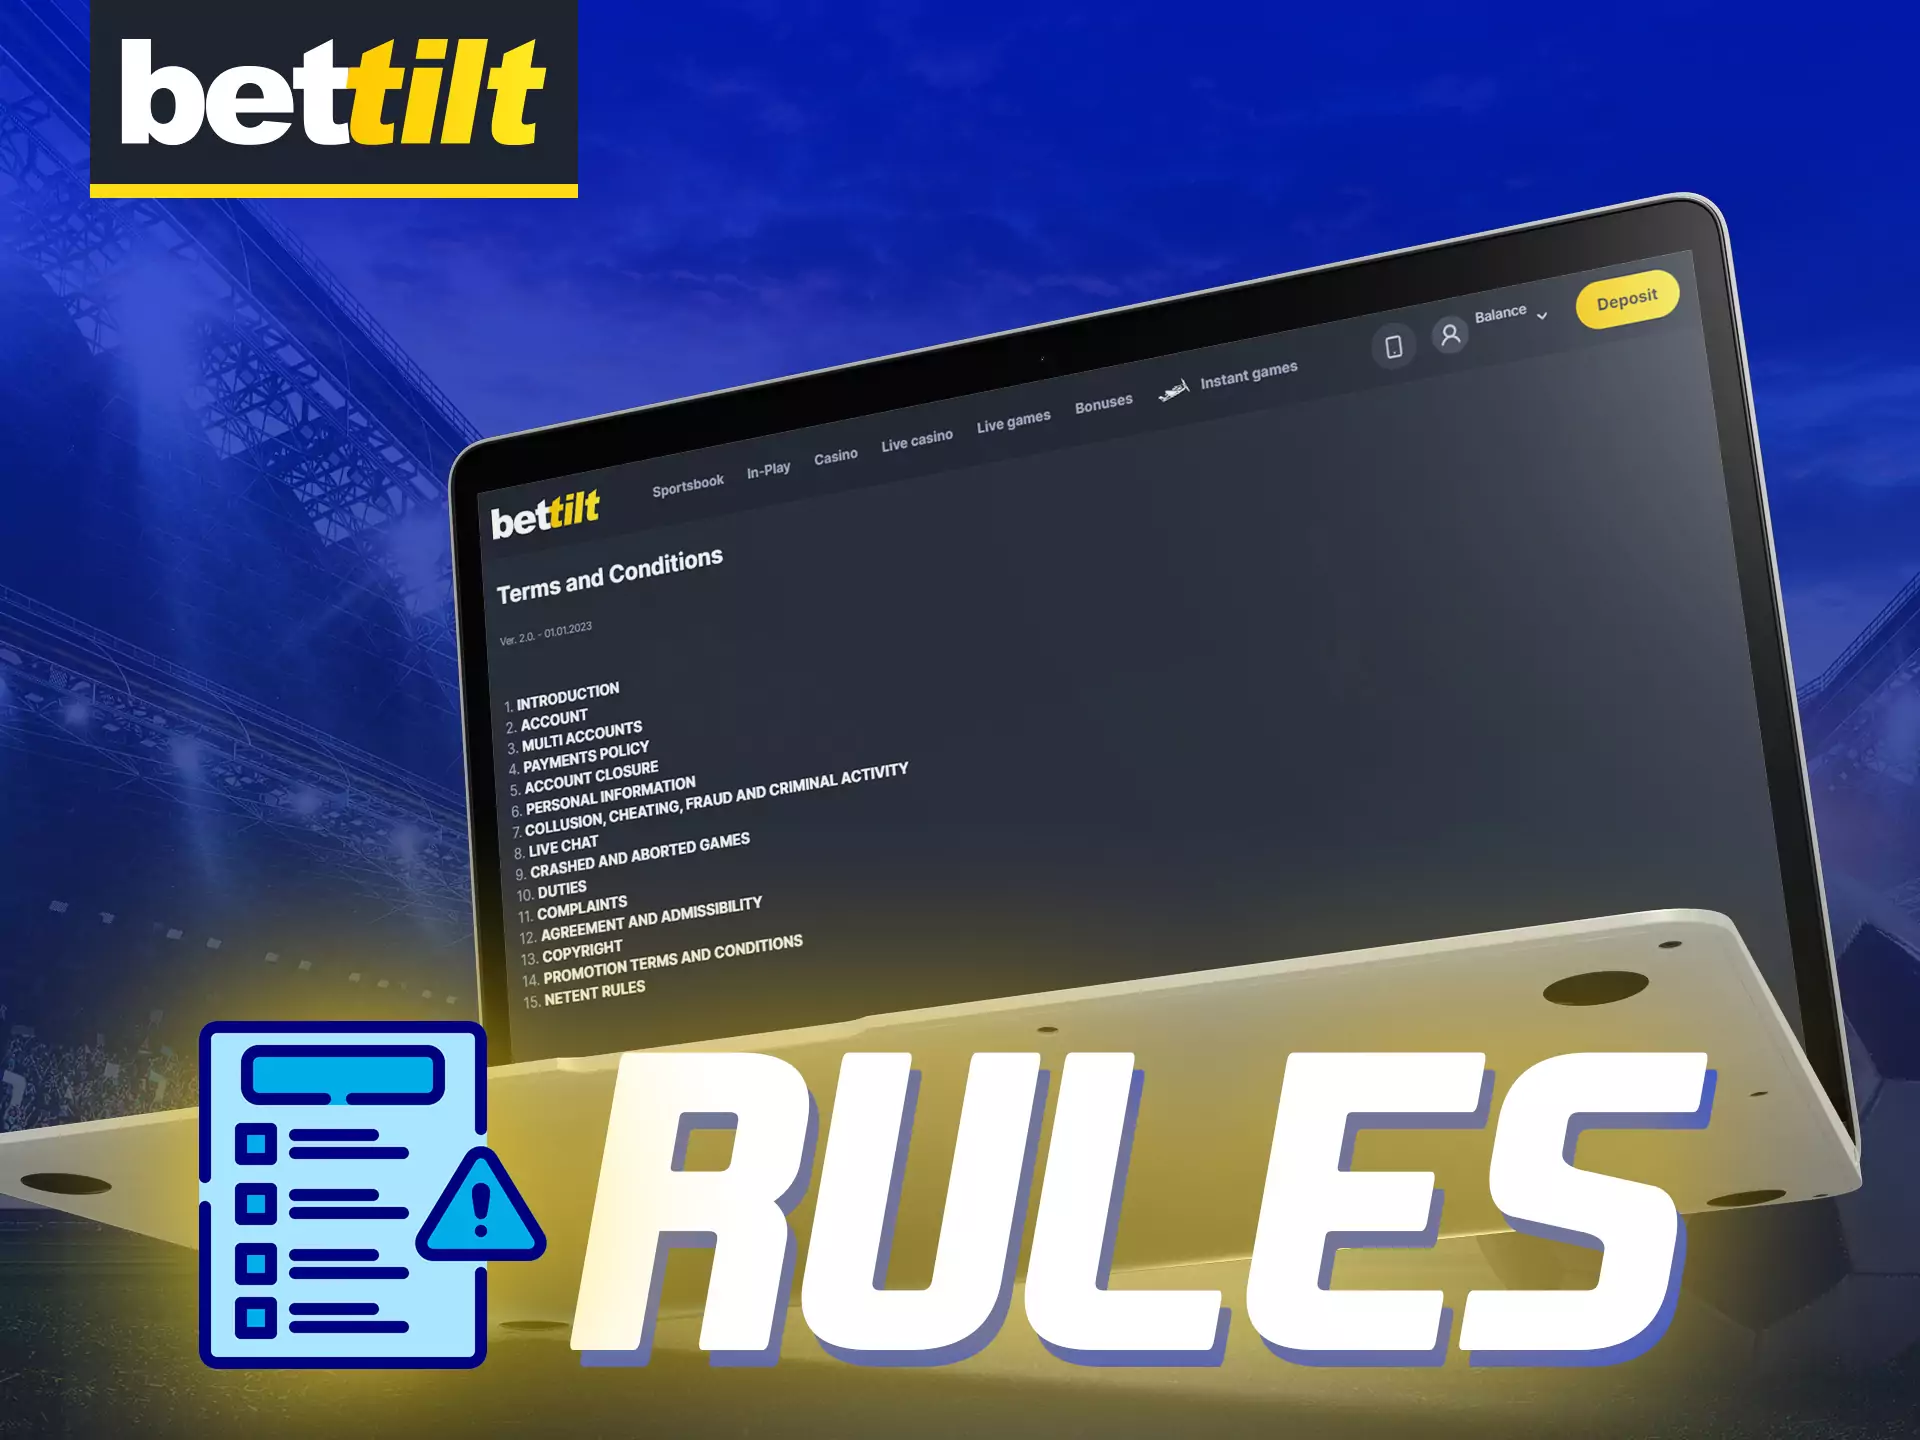 Get to know the simple rules of Bettilt.